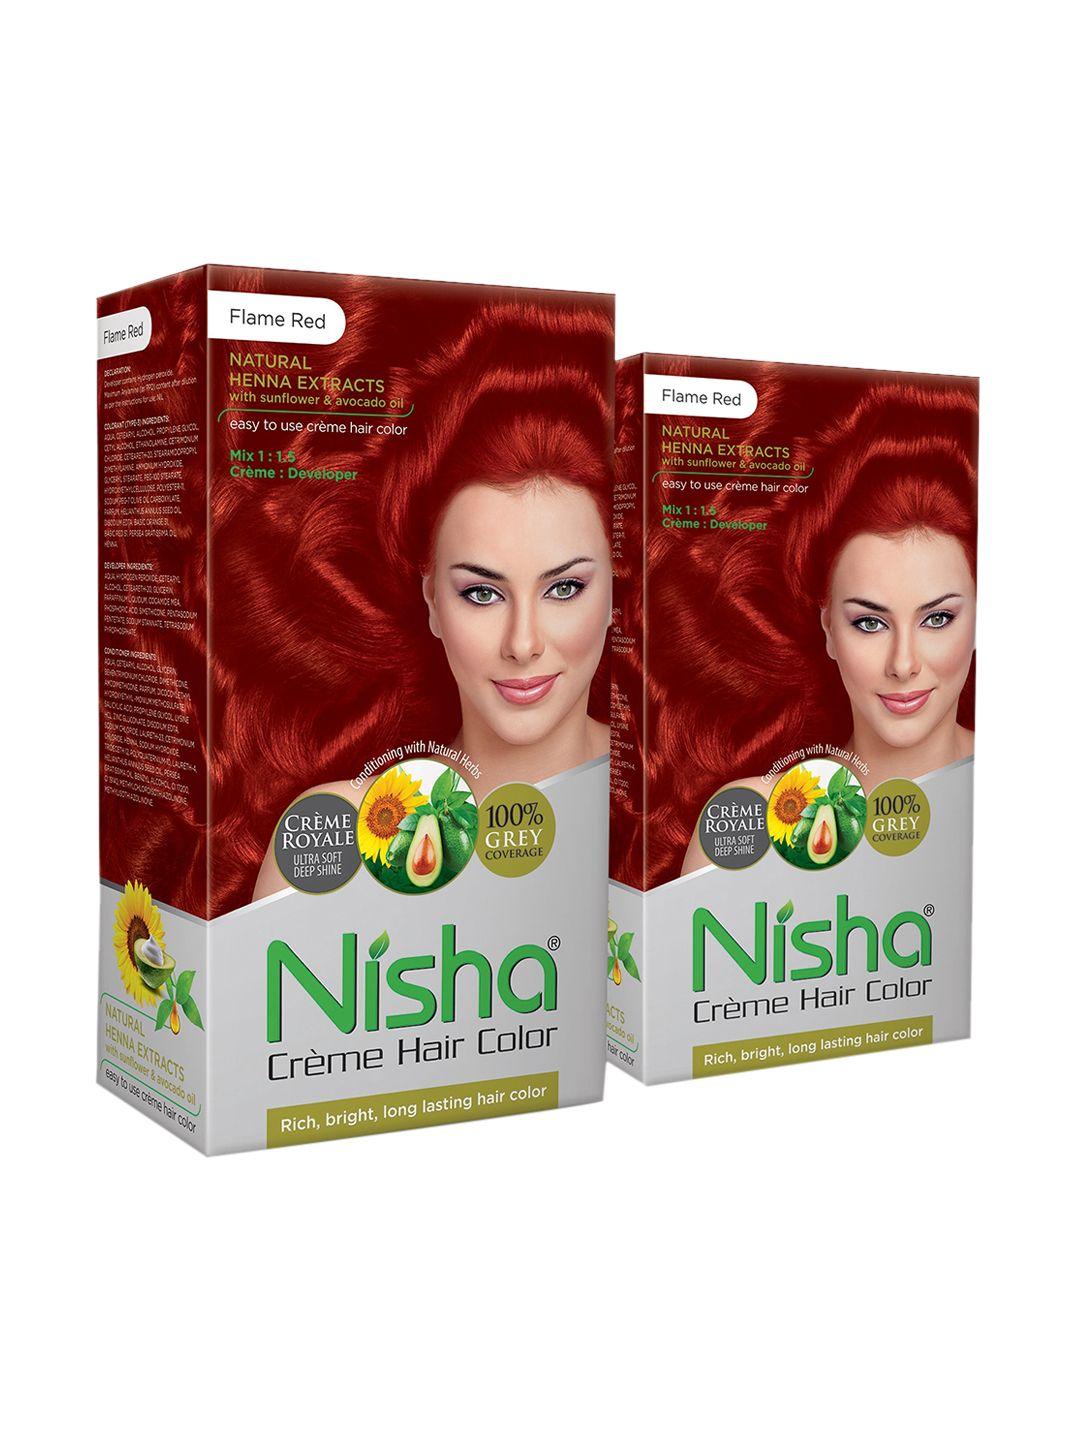 nisha pack of 2 creme hair colour 300g - flame red